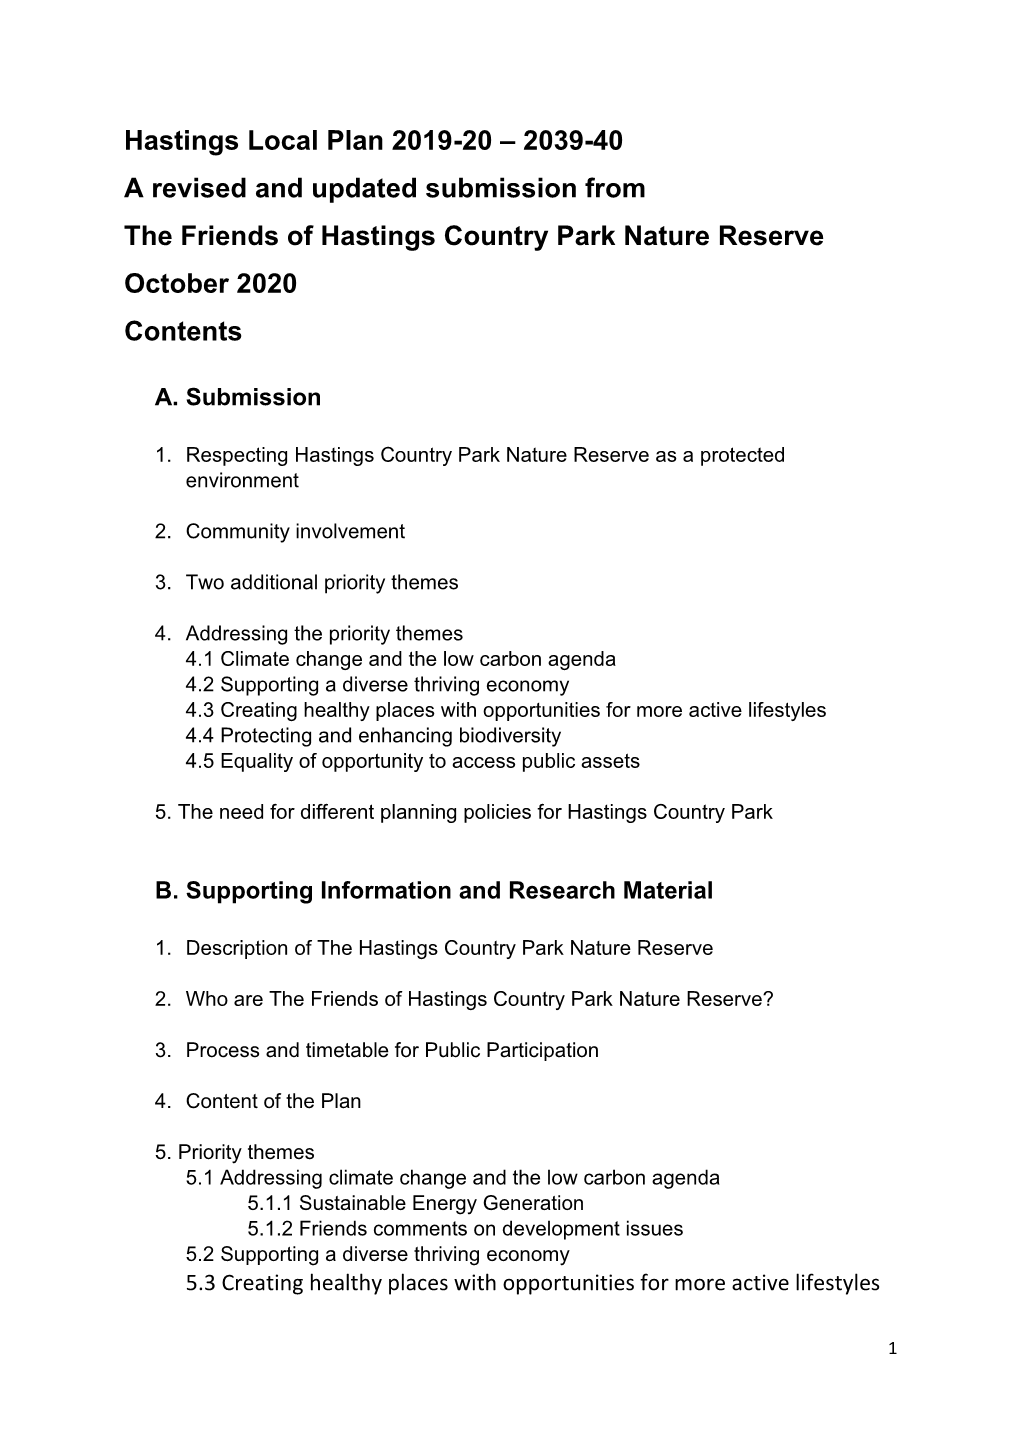 Hastings Local Plan 2019-20 – 2039-40 a Revised and Updated Submission from the Friends of Hastings Country Park Nature Reserve October 2020 Contents